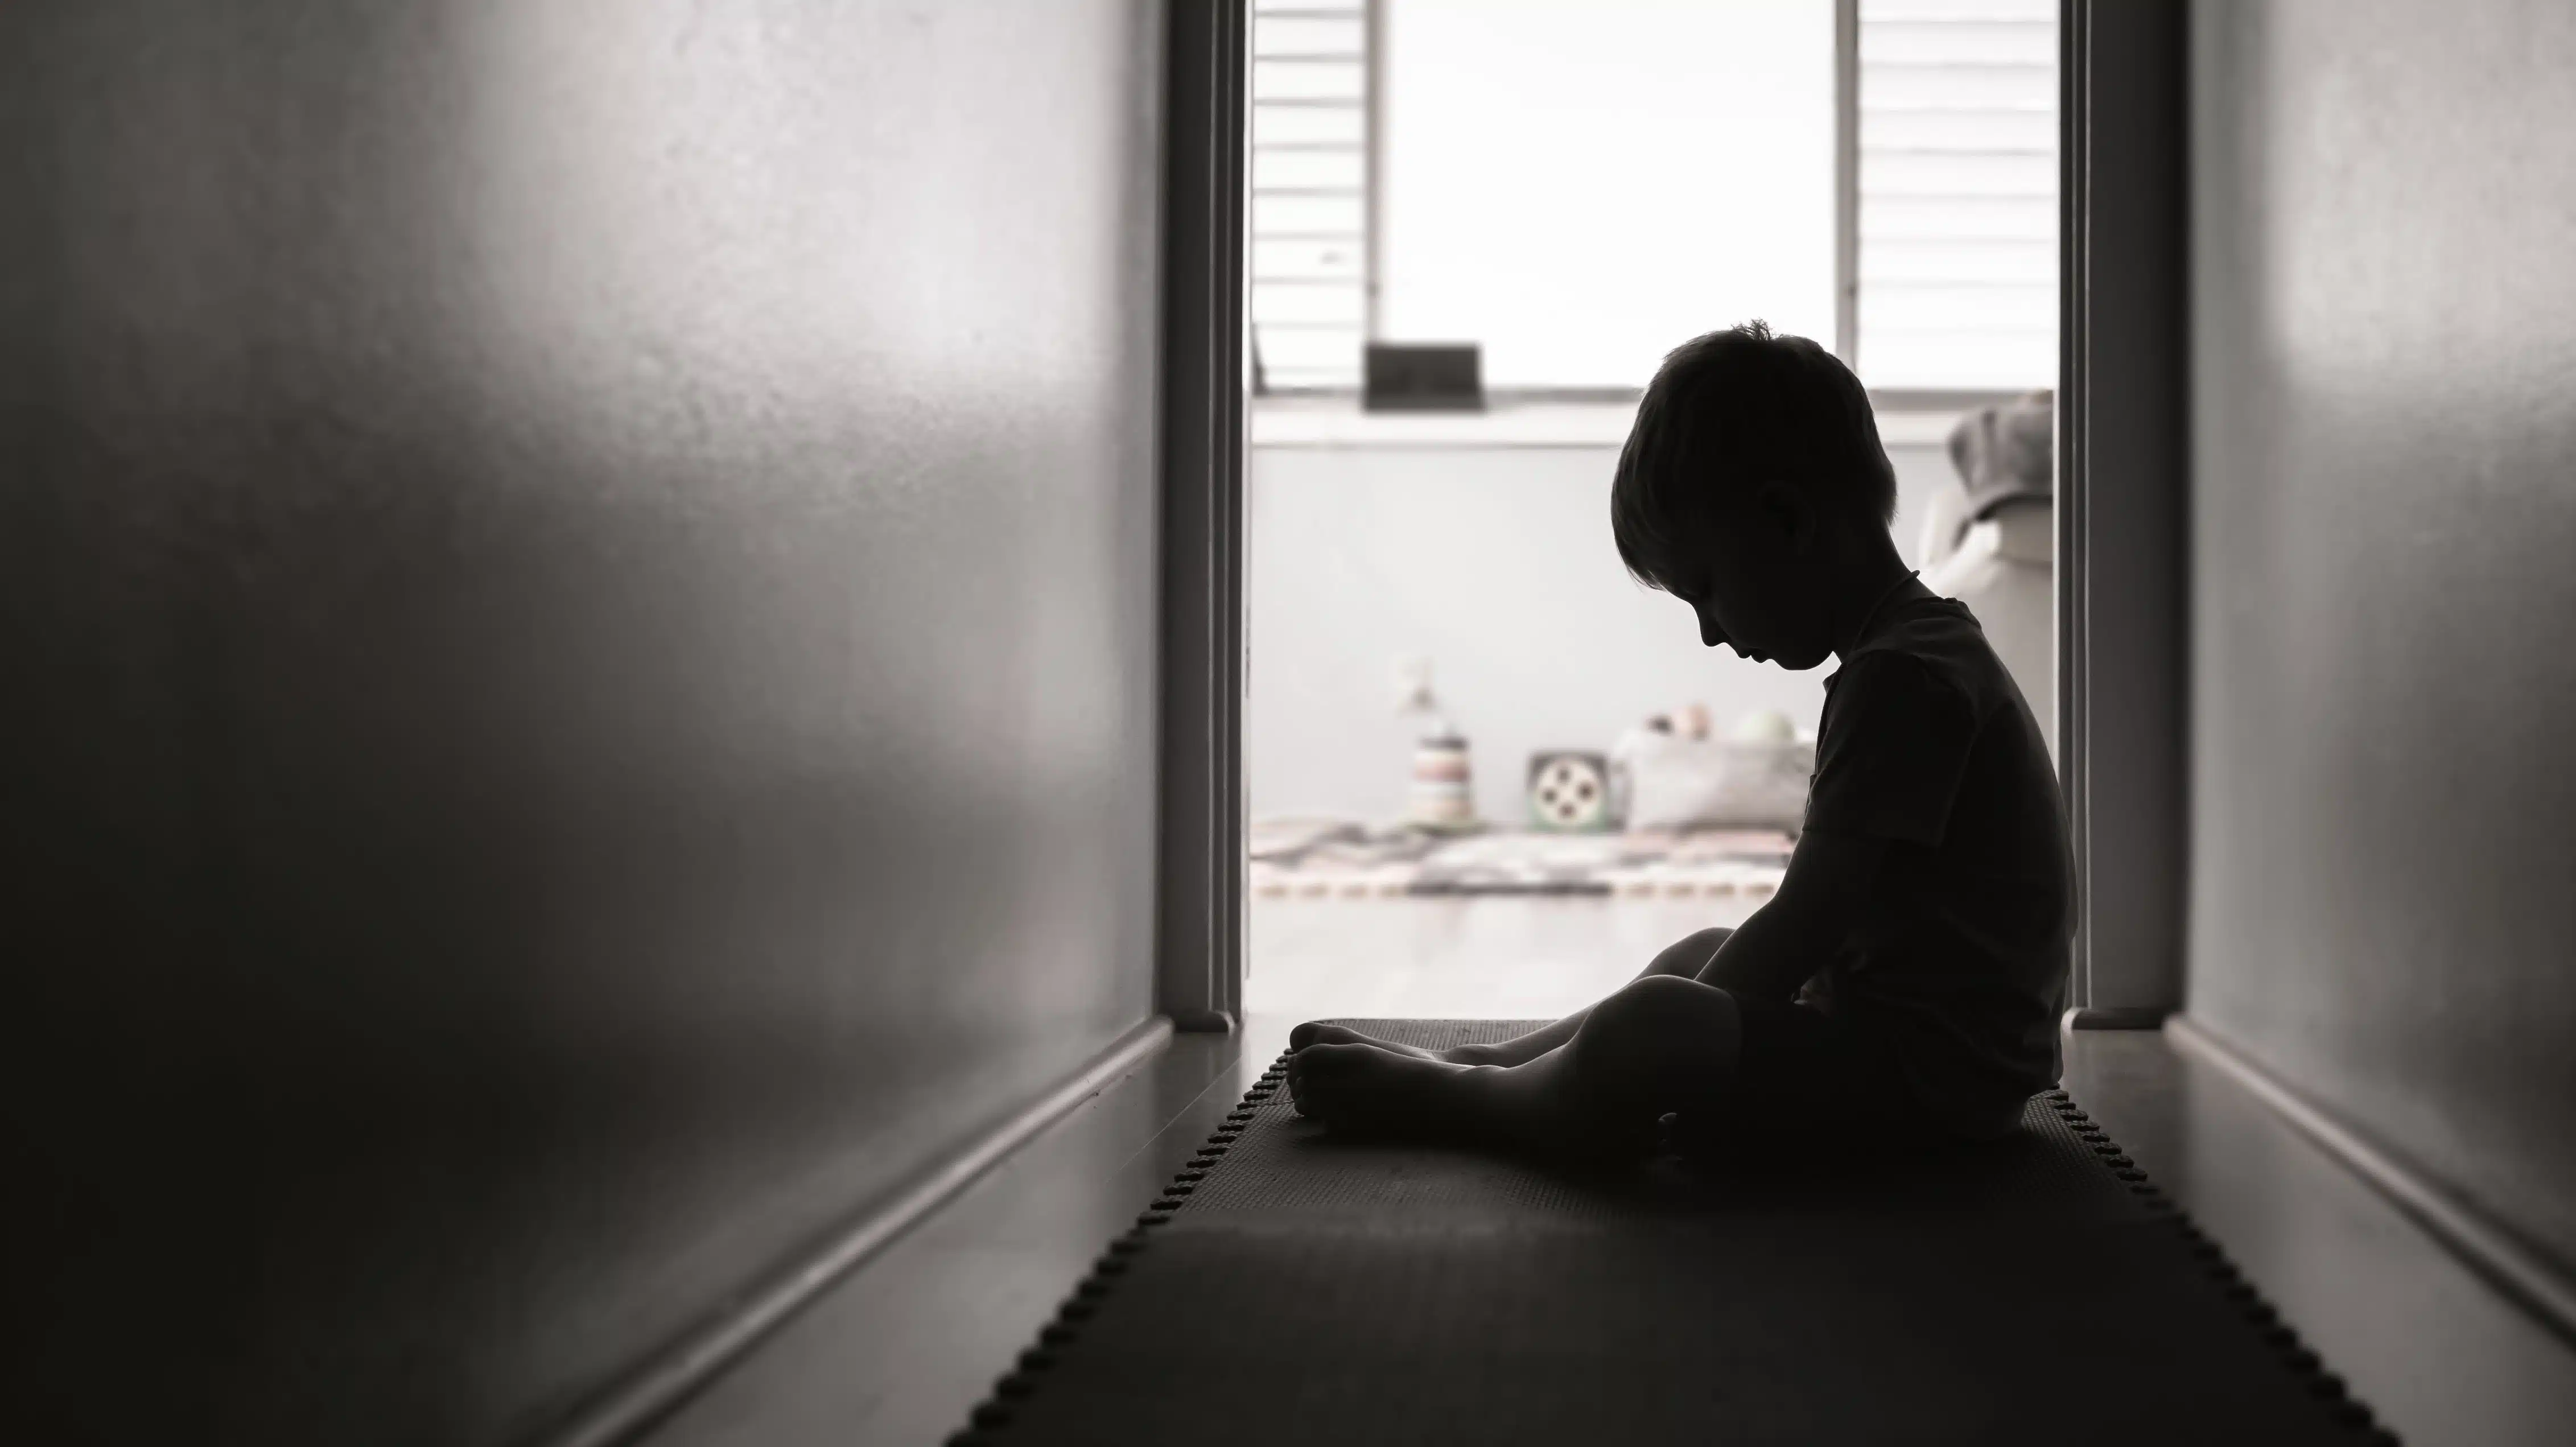 A silhouette of a child sitting alone in a dark hallway - Substance Abuse In The Foster Care System